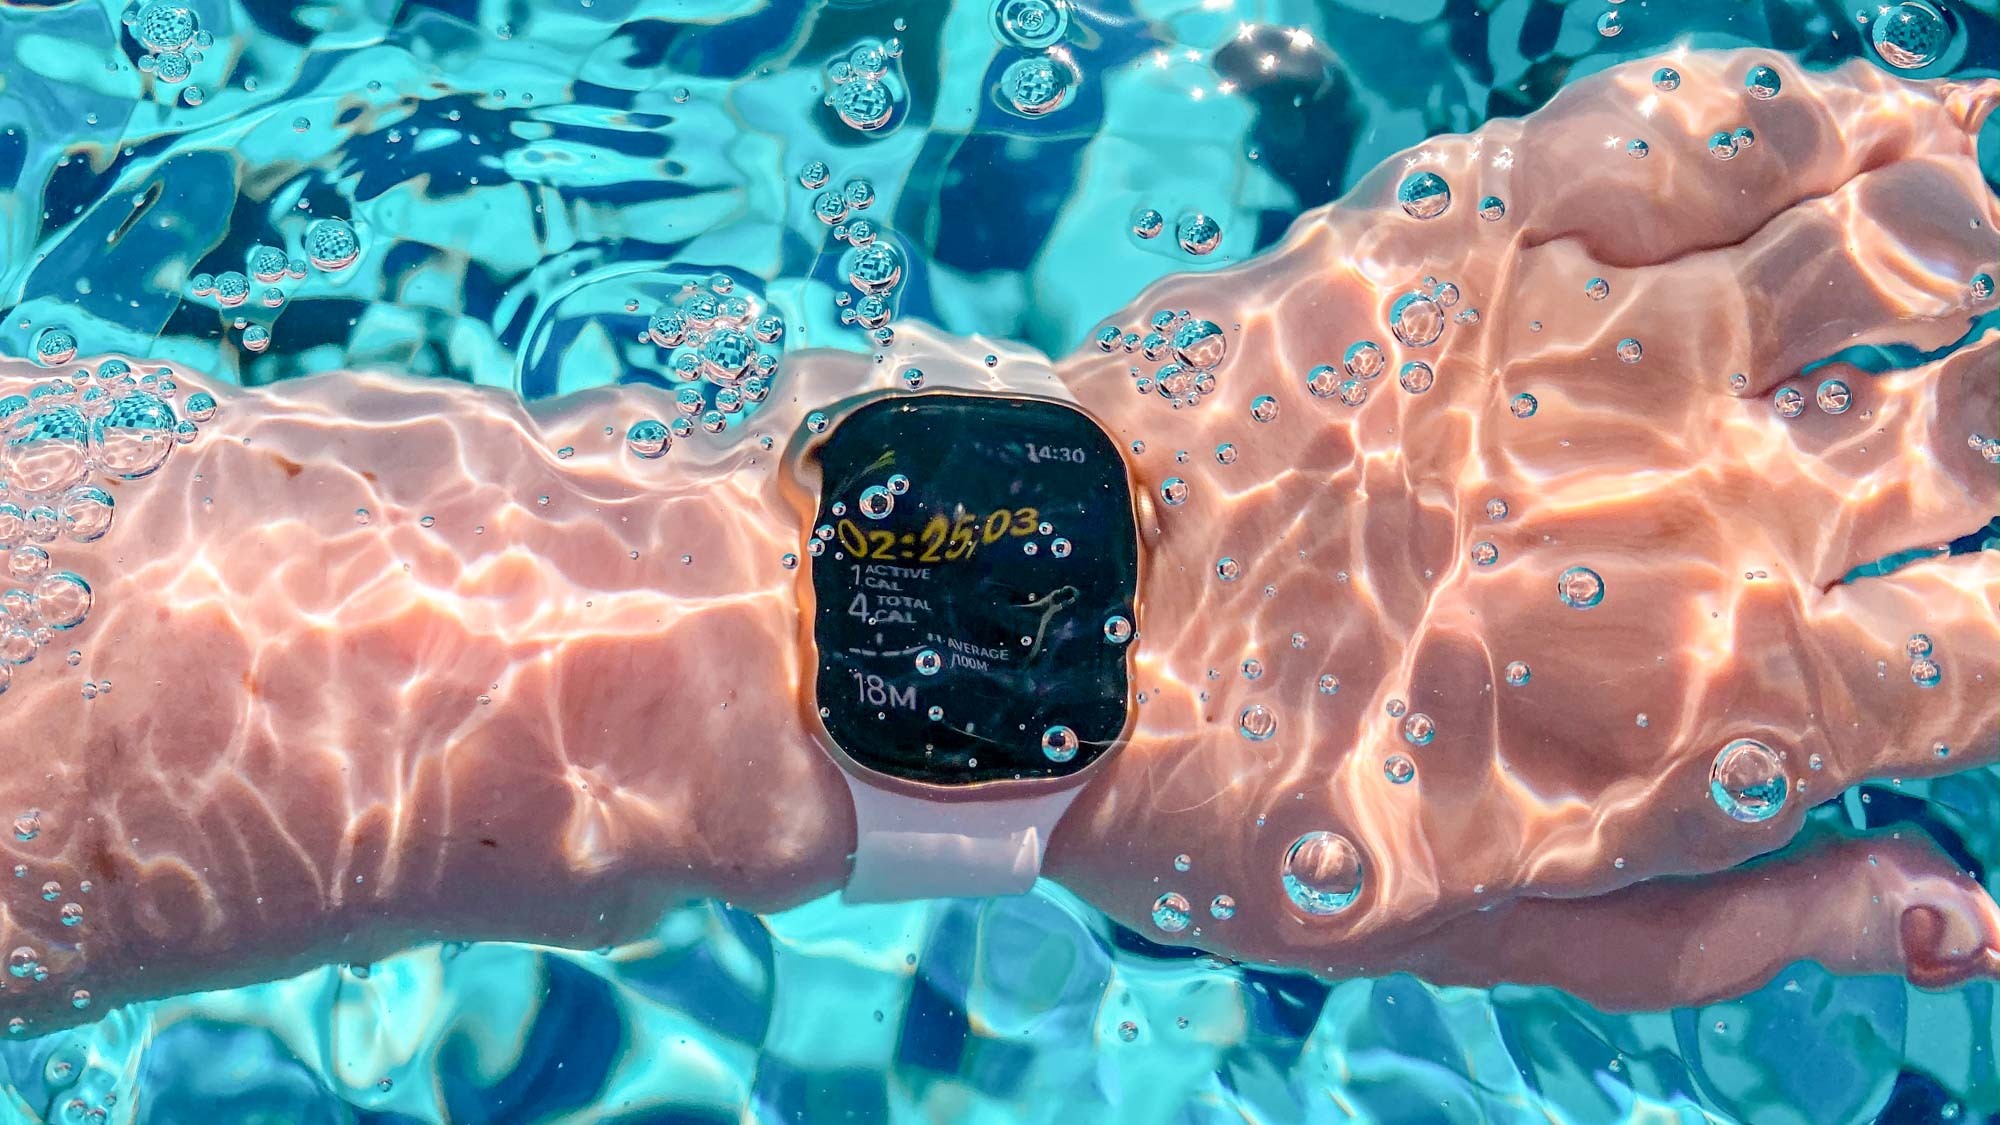 Use Water lock mode to swim with your Samsung smart watch